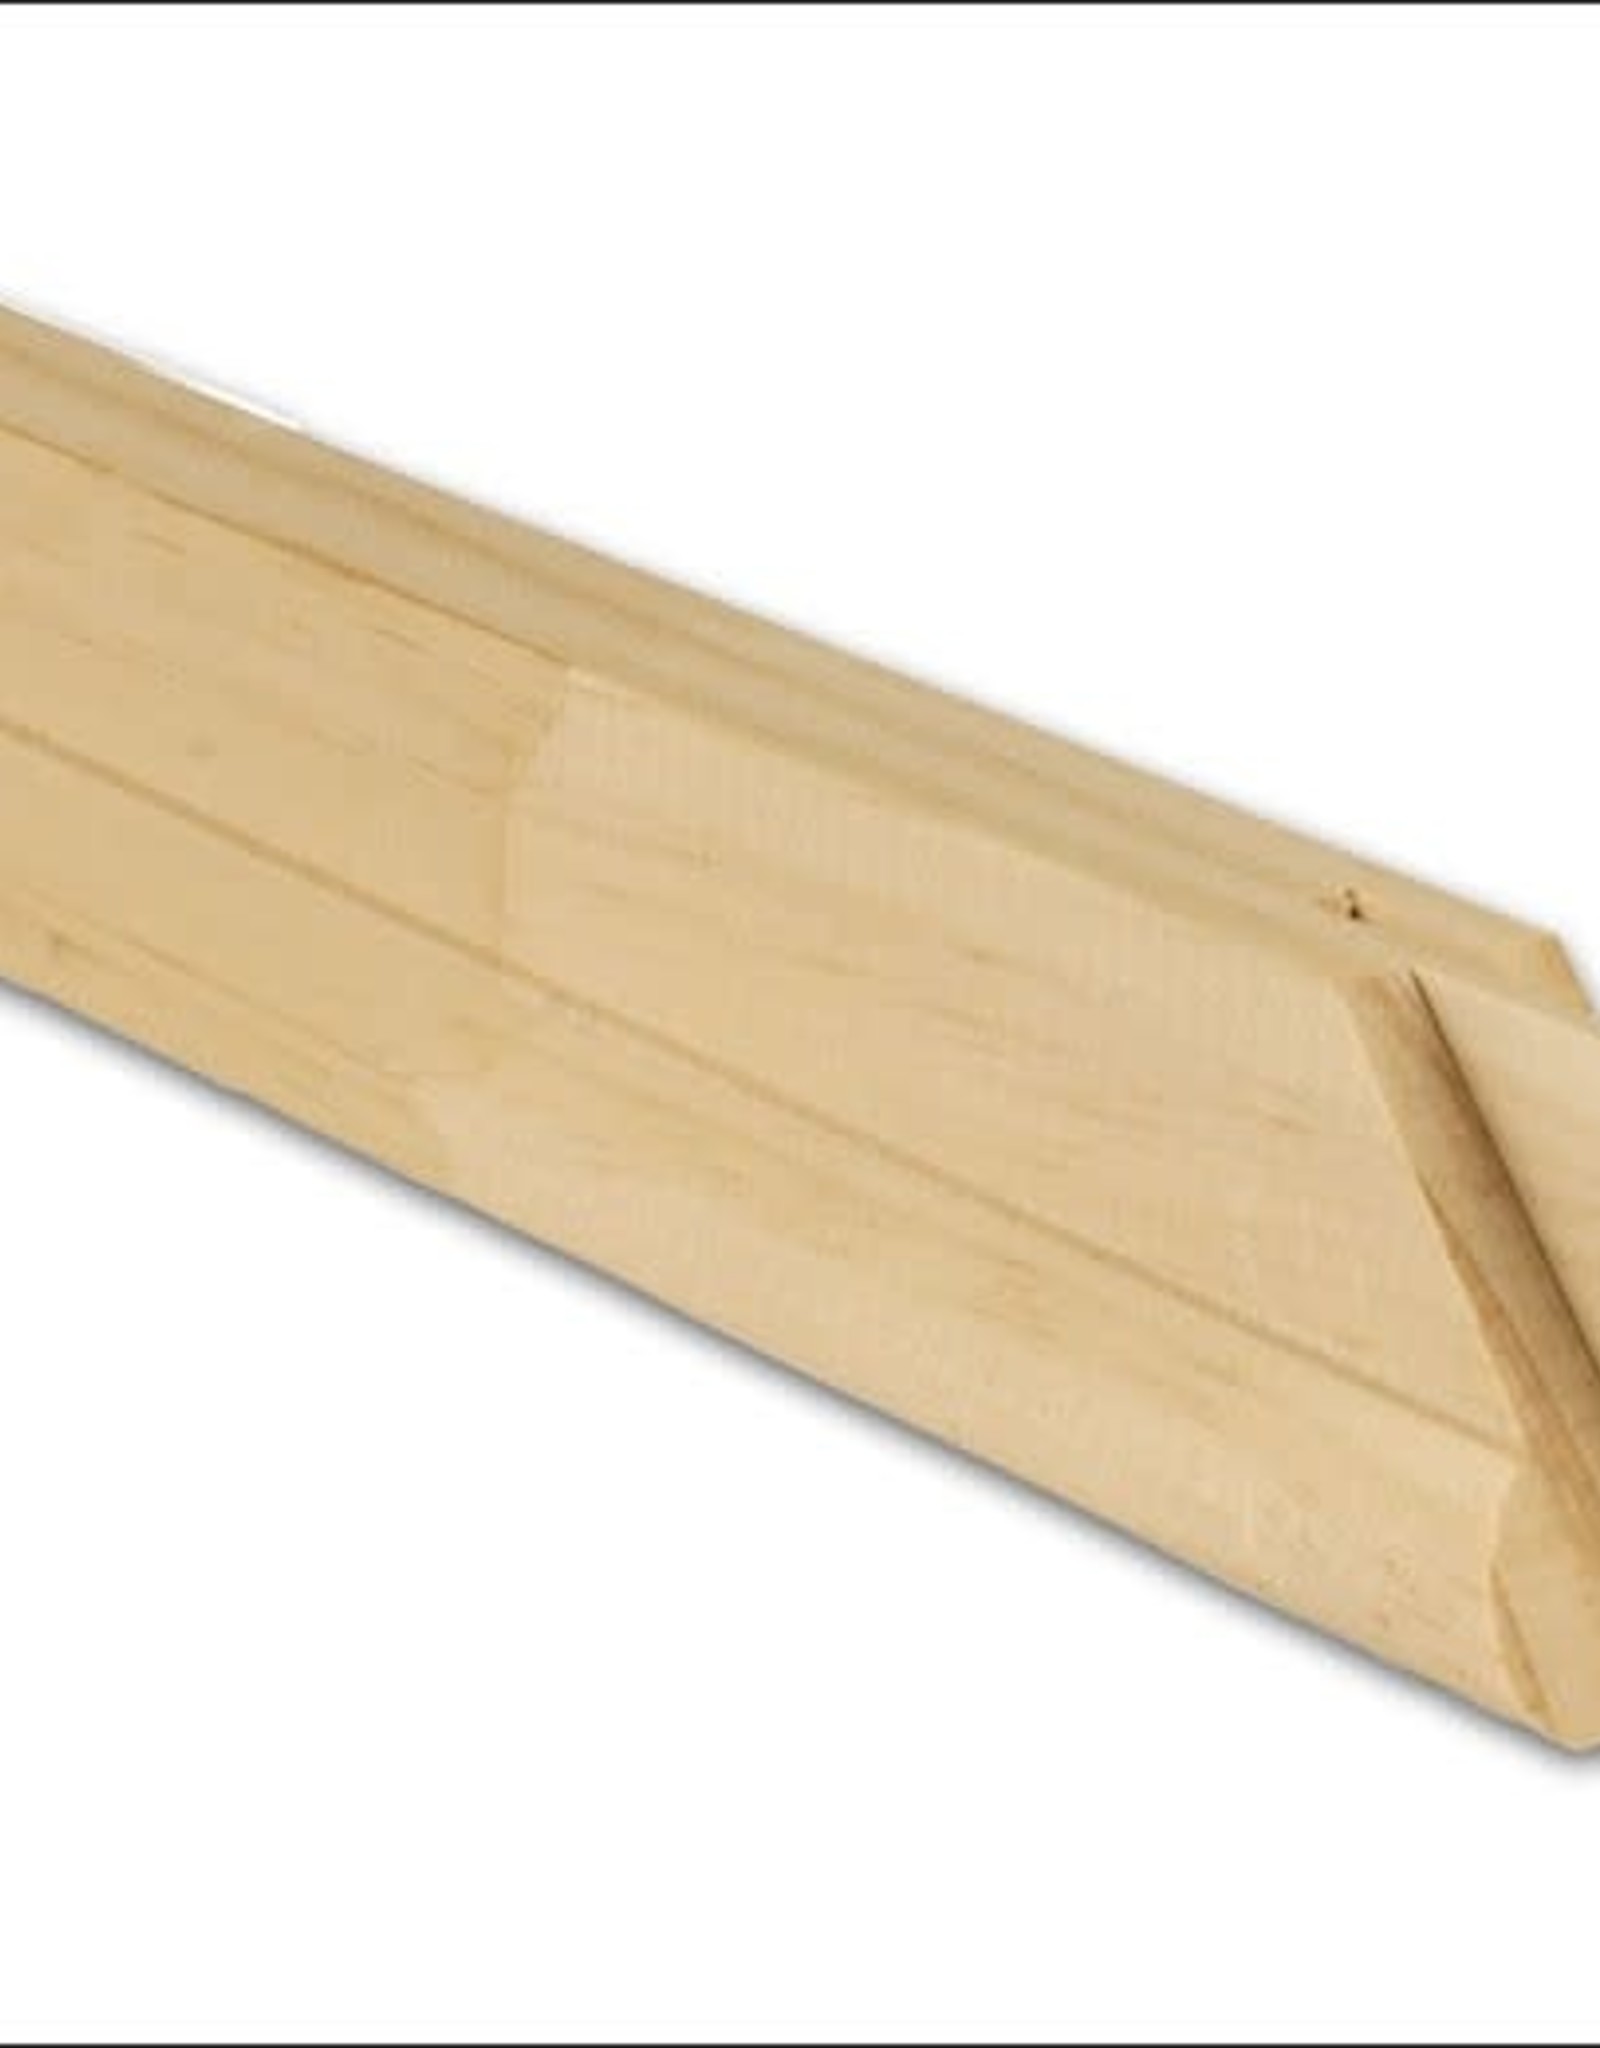 Stretcher Bars 34", Jack Richeson Heavy Duty, (Sold in a Pair = 2 Stretcher Bars)